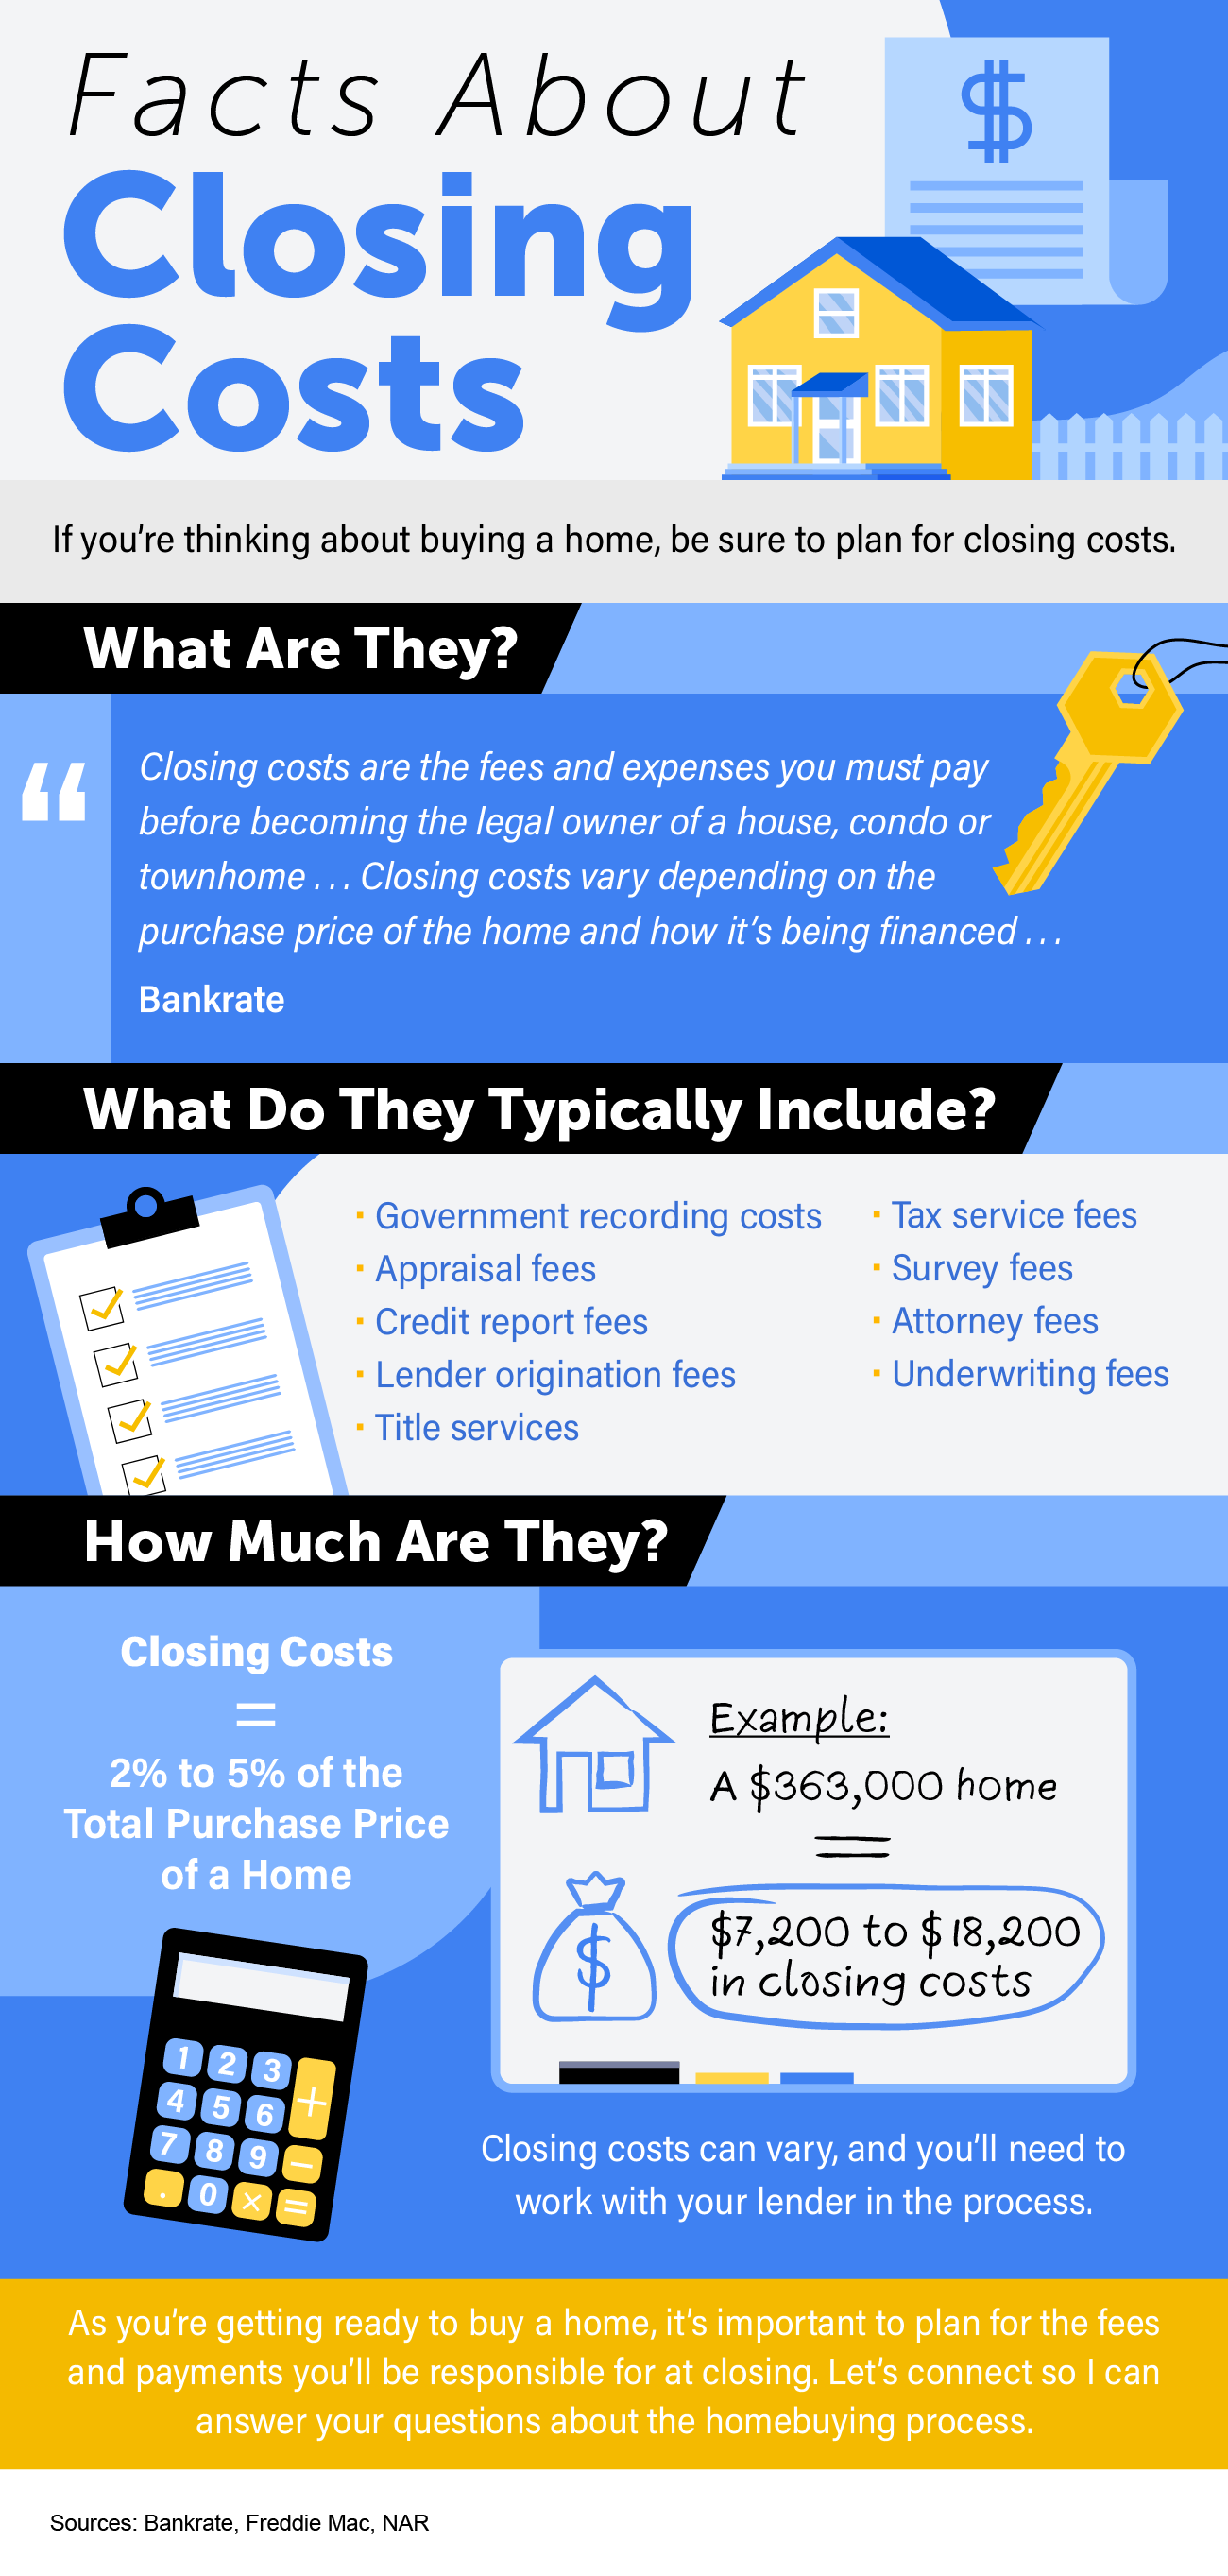 Facts about closing costs - Chicago real estate news